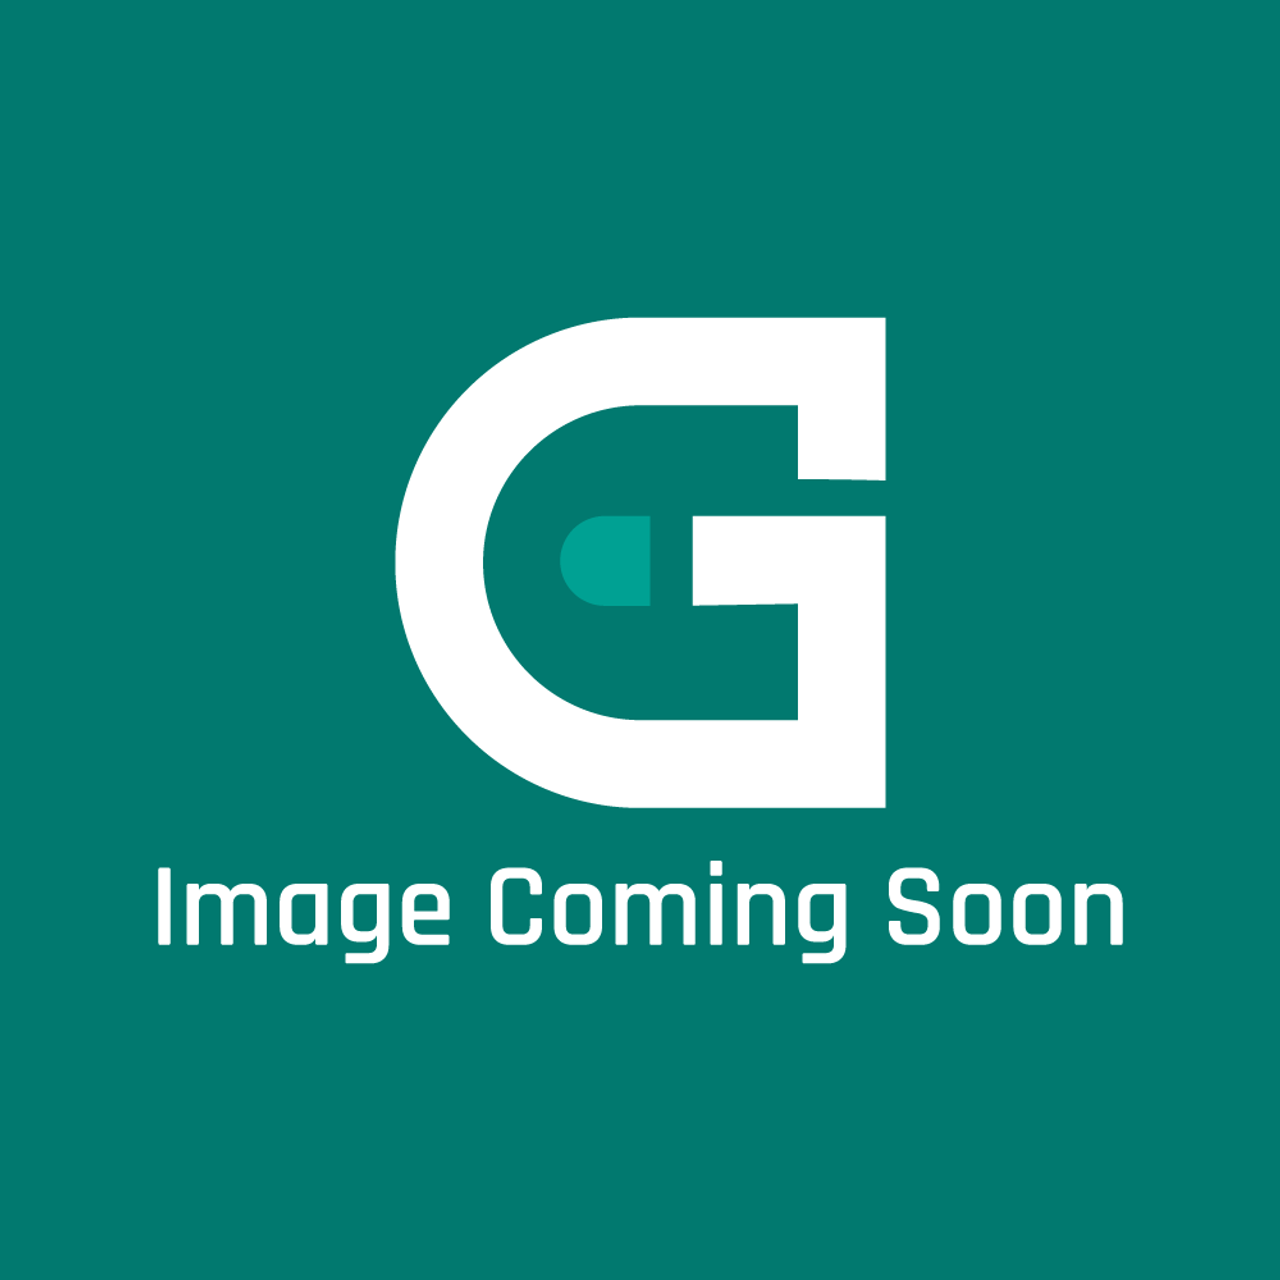 Blodgett 54771 - Kit, Gasket Channel Comb I - Image Coming Soon!